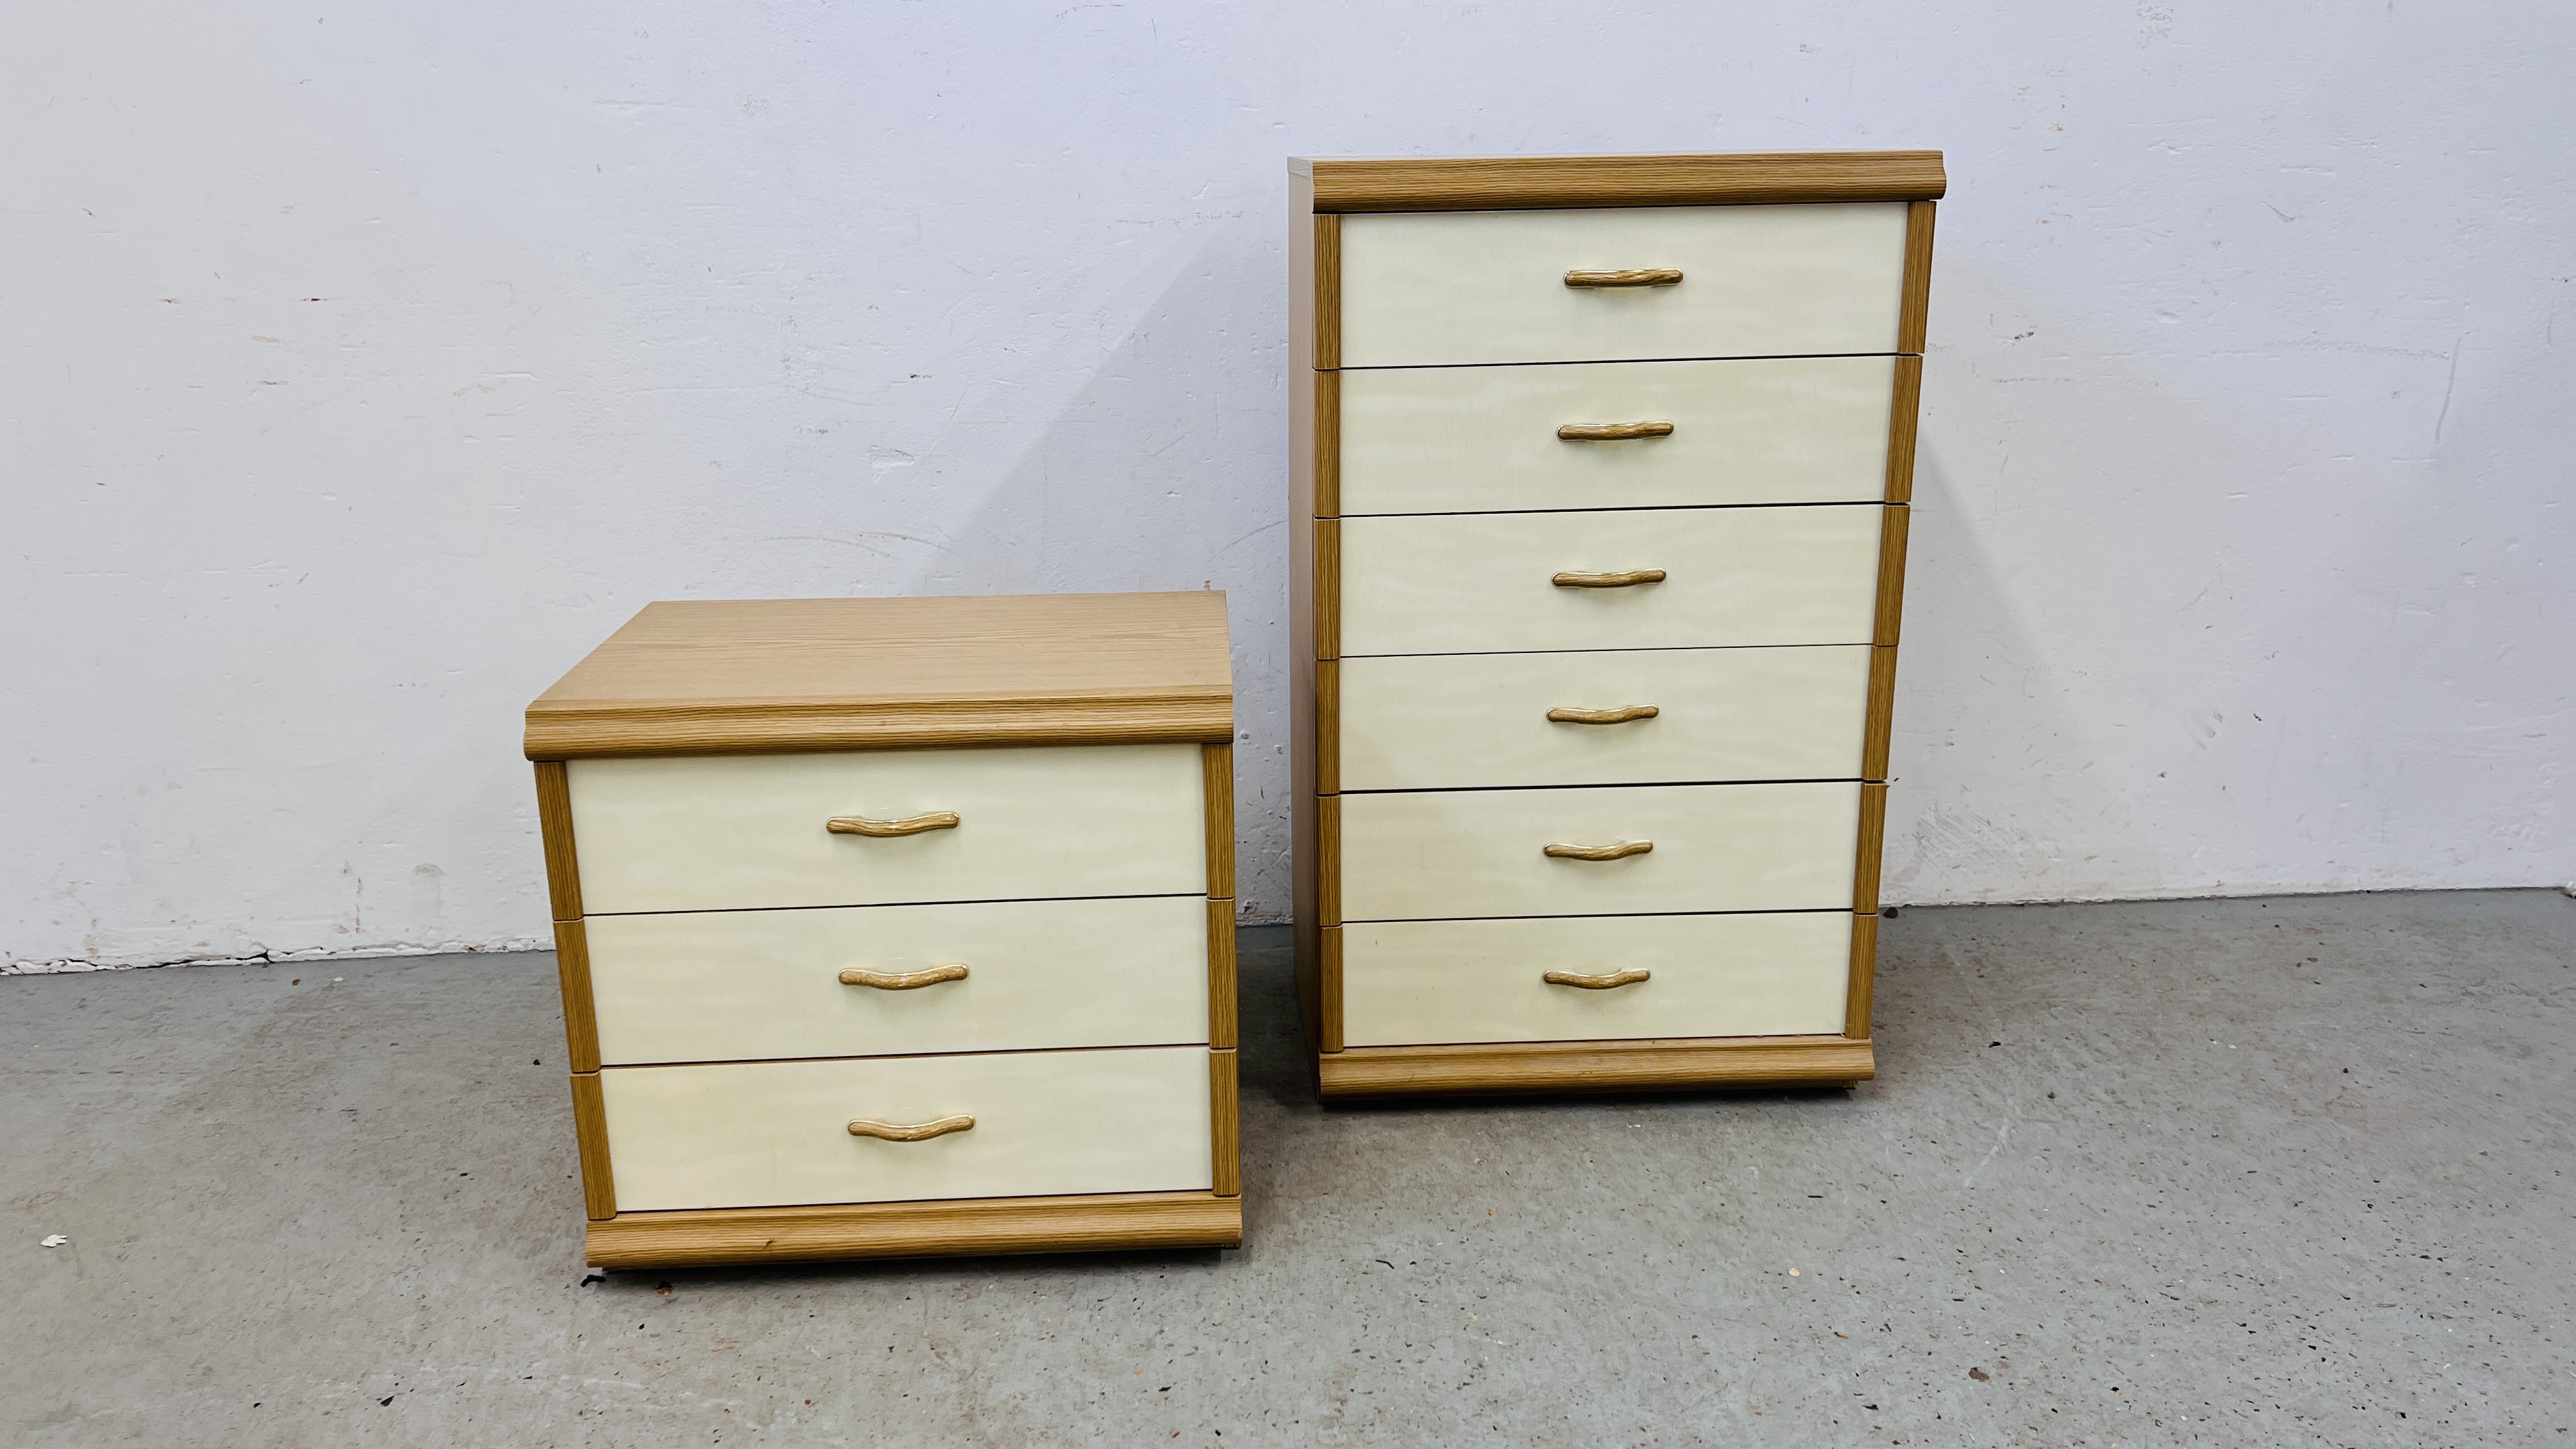 MODERN 6 DRAWER BEDROOM CHEST - W 60CM X D 42CM X H 100CM ALONG WTH A MATCHING BEDSIDE 3 DRAWER